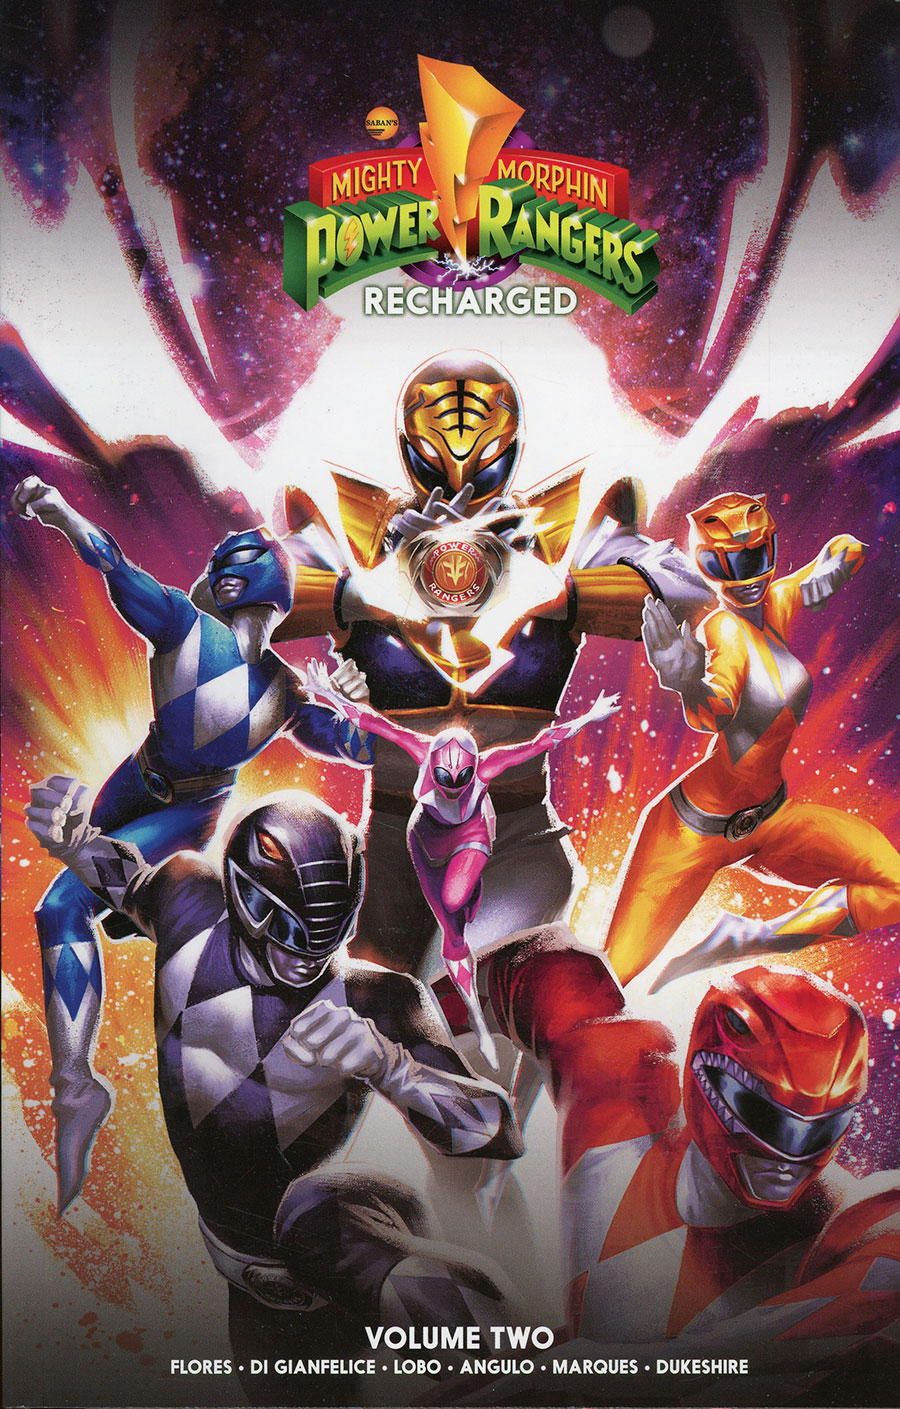 Mighty Morphin Power Rangers Recharged Vol 2 TP